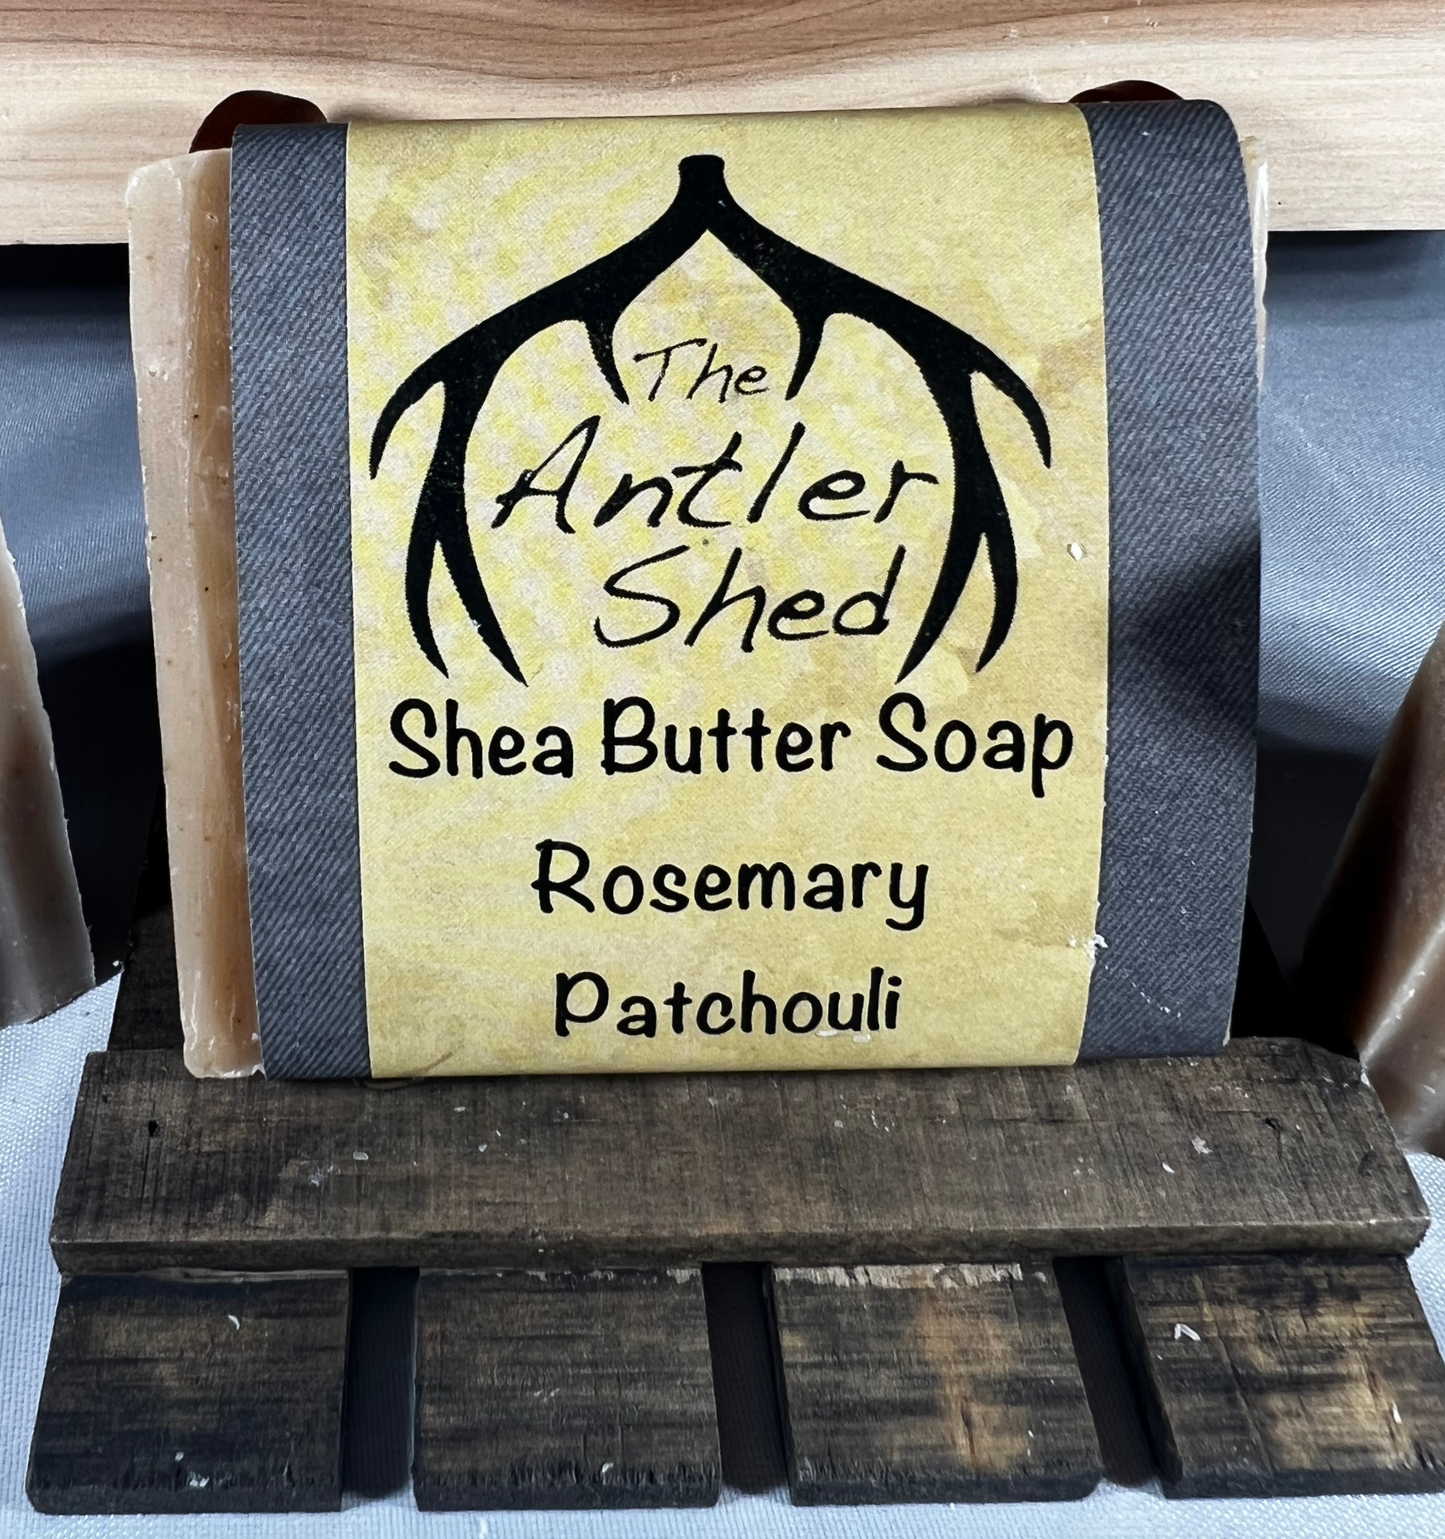 Rosemary Patchouli Shea Butter Cold Process Handmade Soap